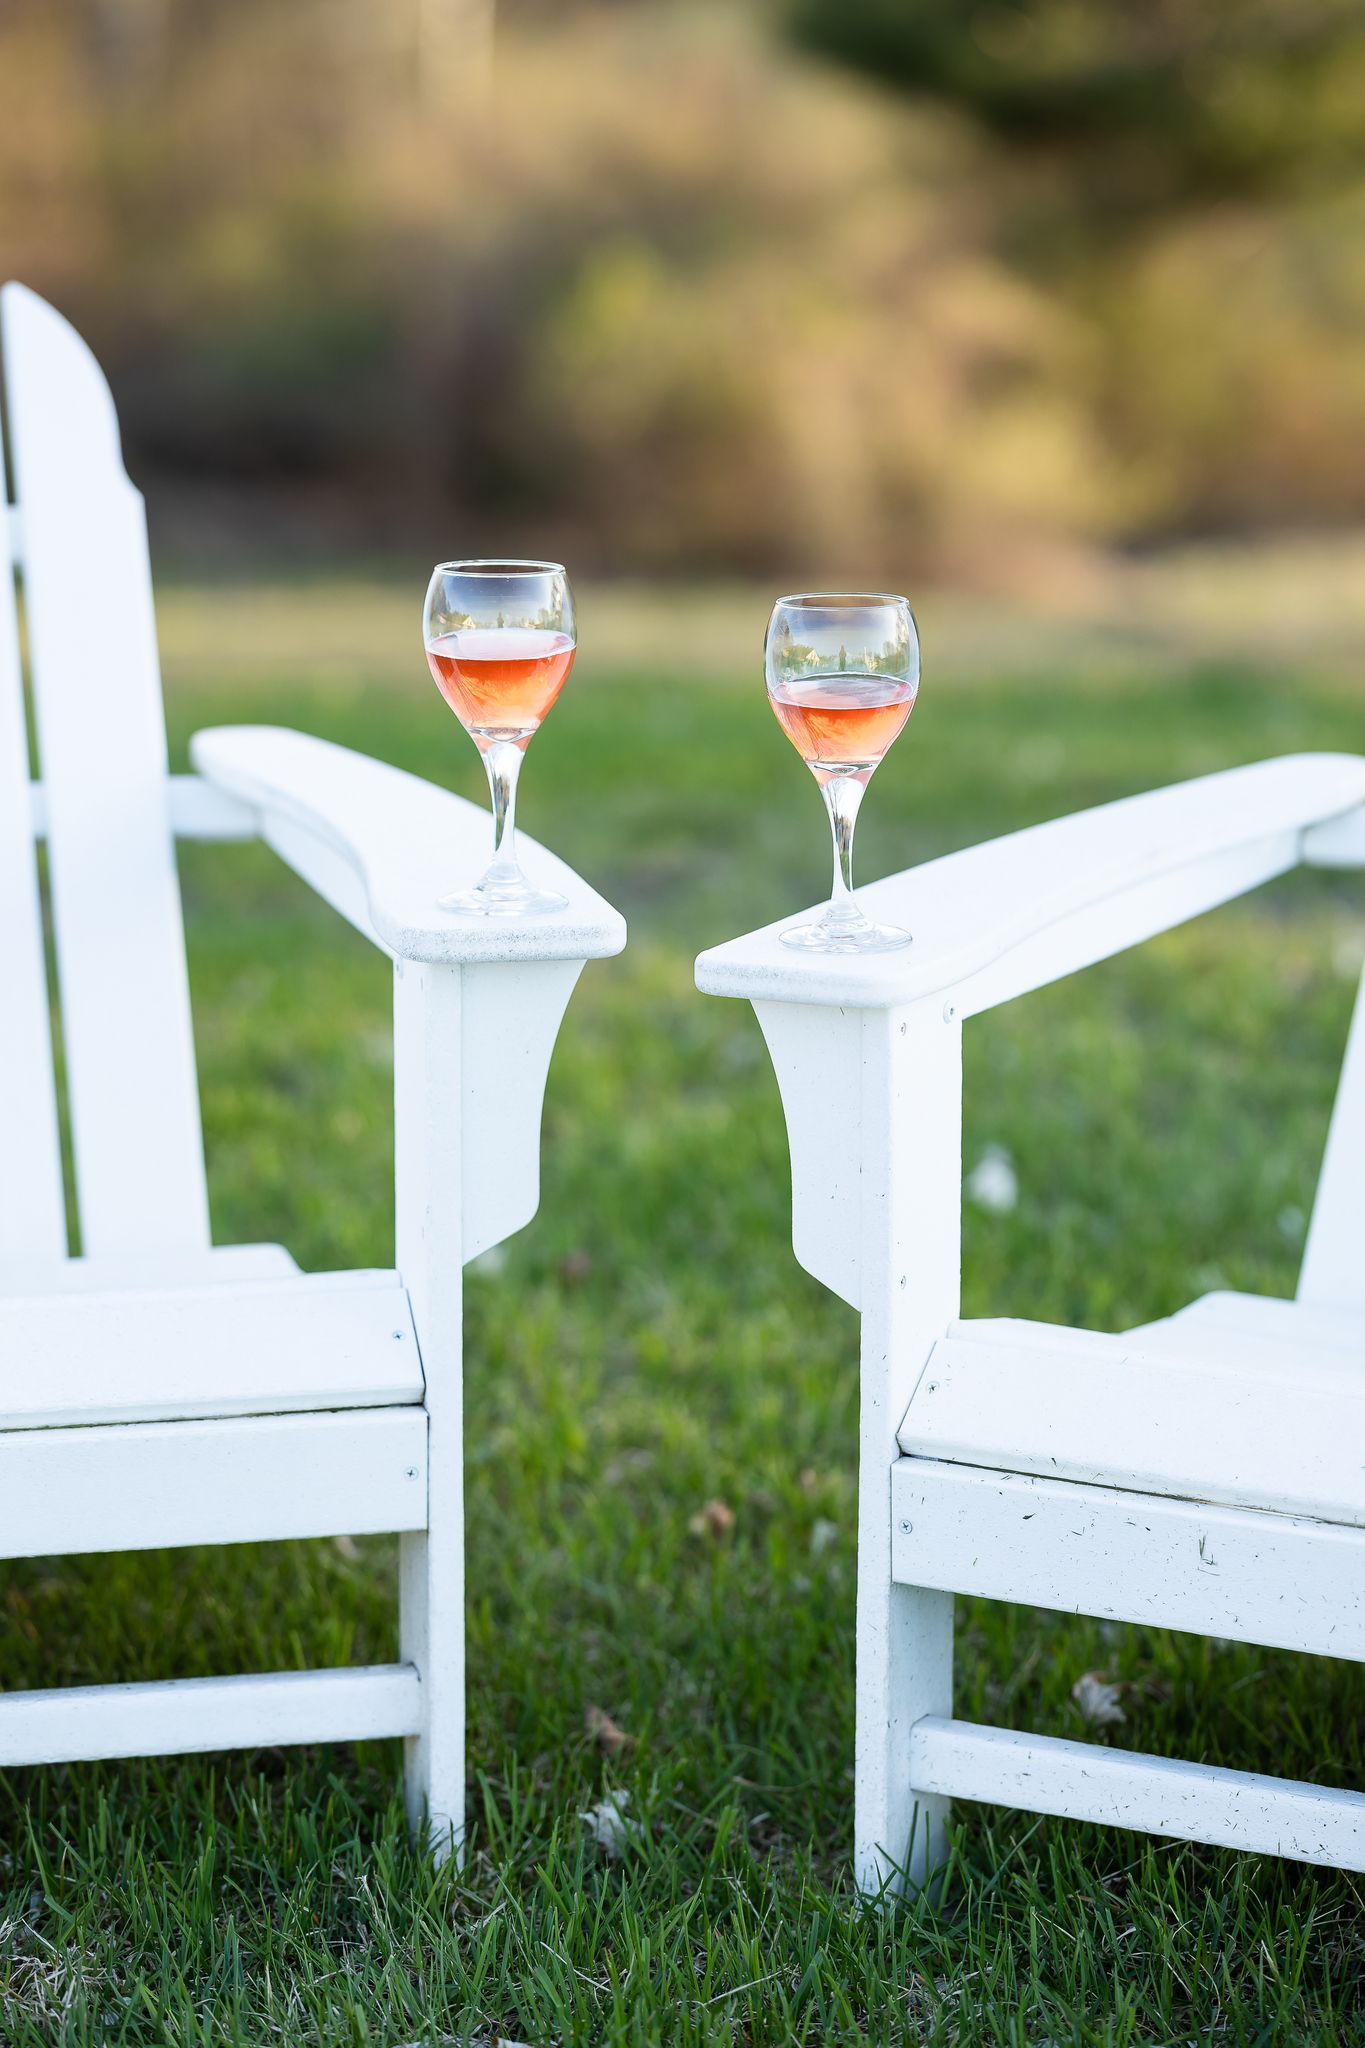 Two white Adirondack chairs with wine glasses on the armrests in the grass.